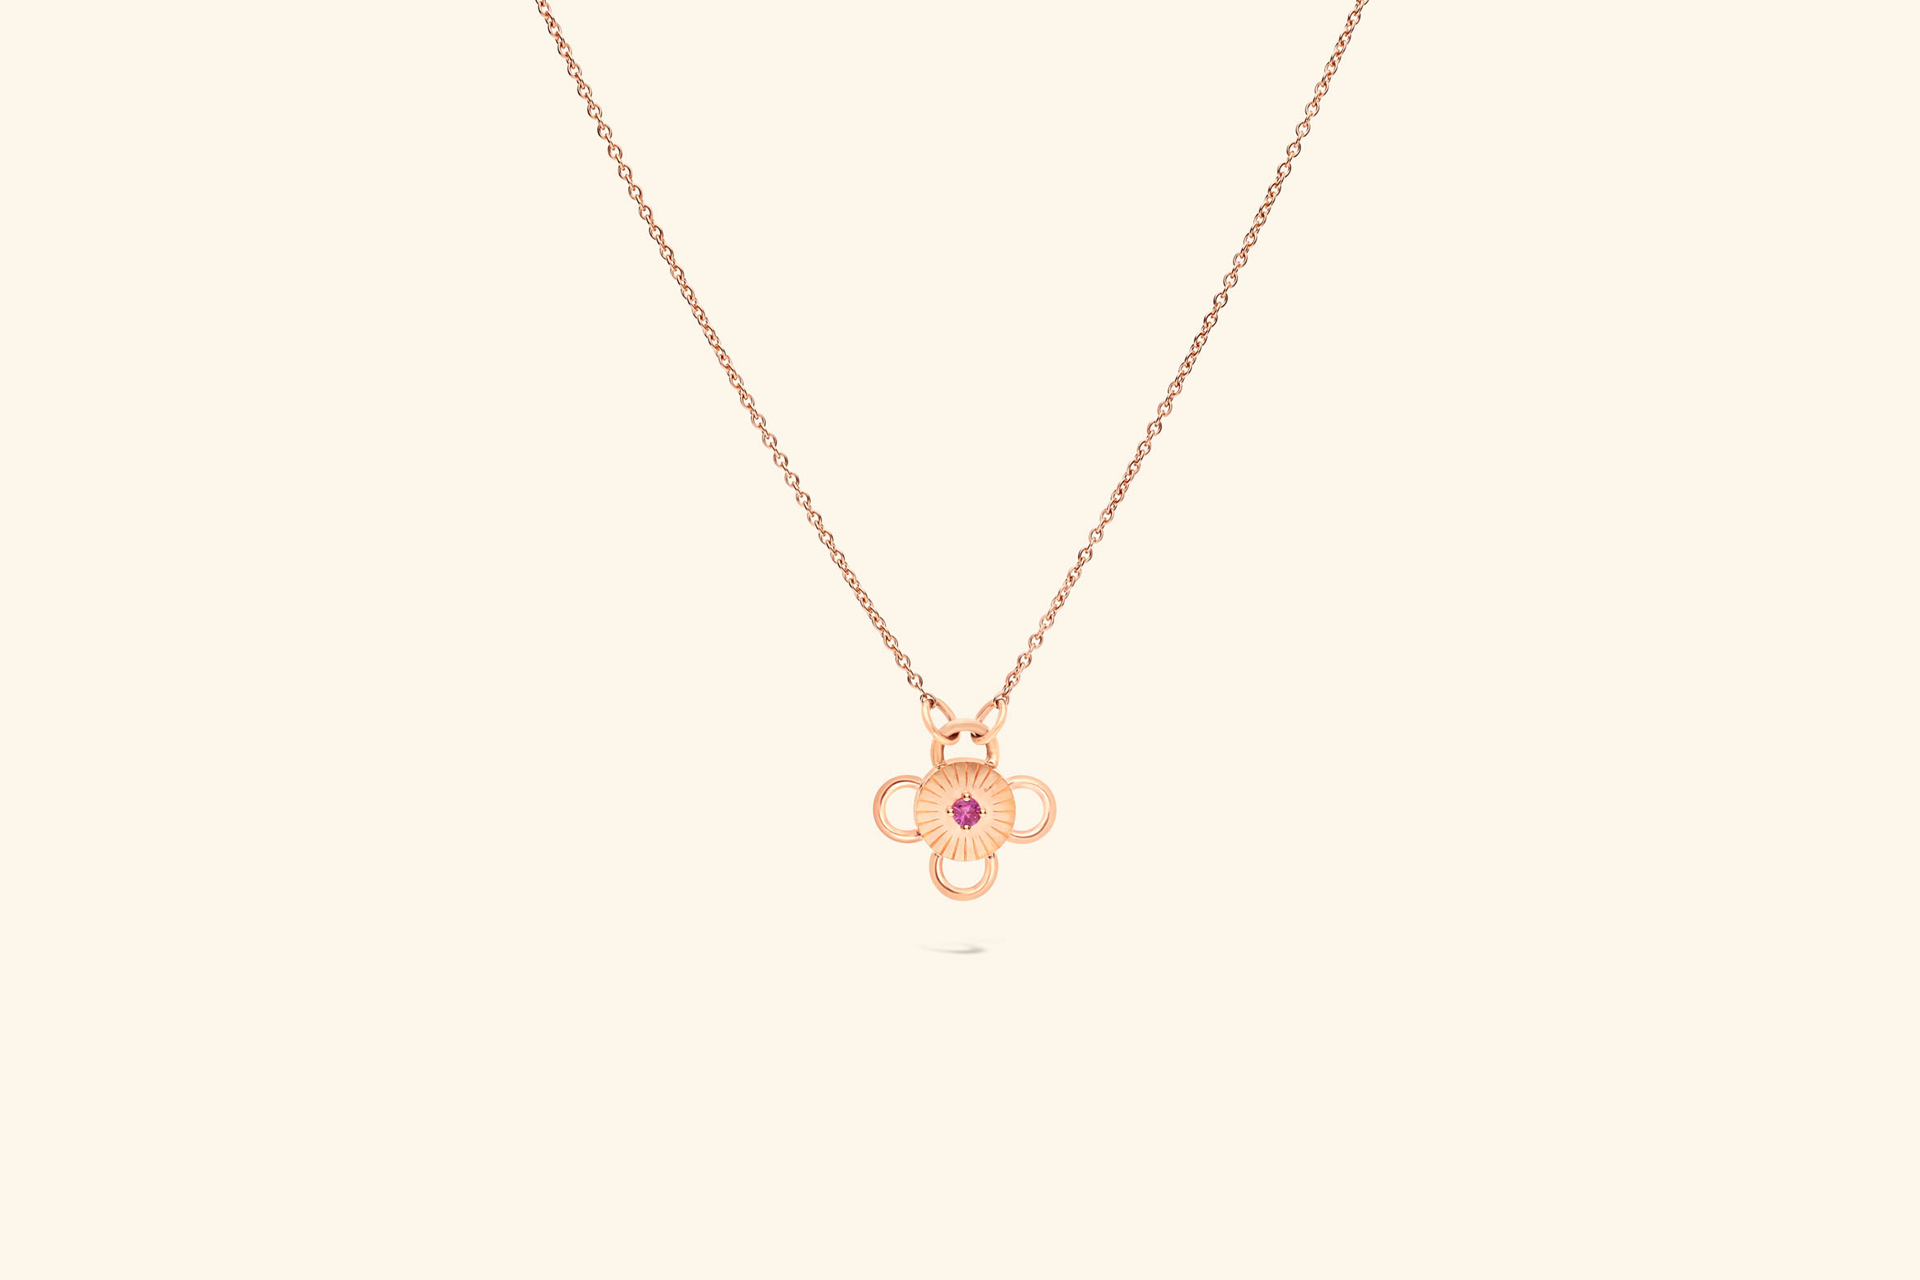 Baby Bolt NecklaceA ~0.07 carat pink sapphire set on a recycled rose gold motif. 